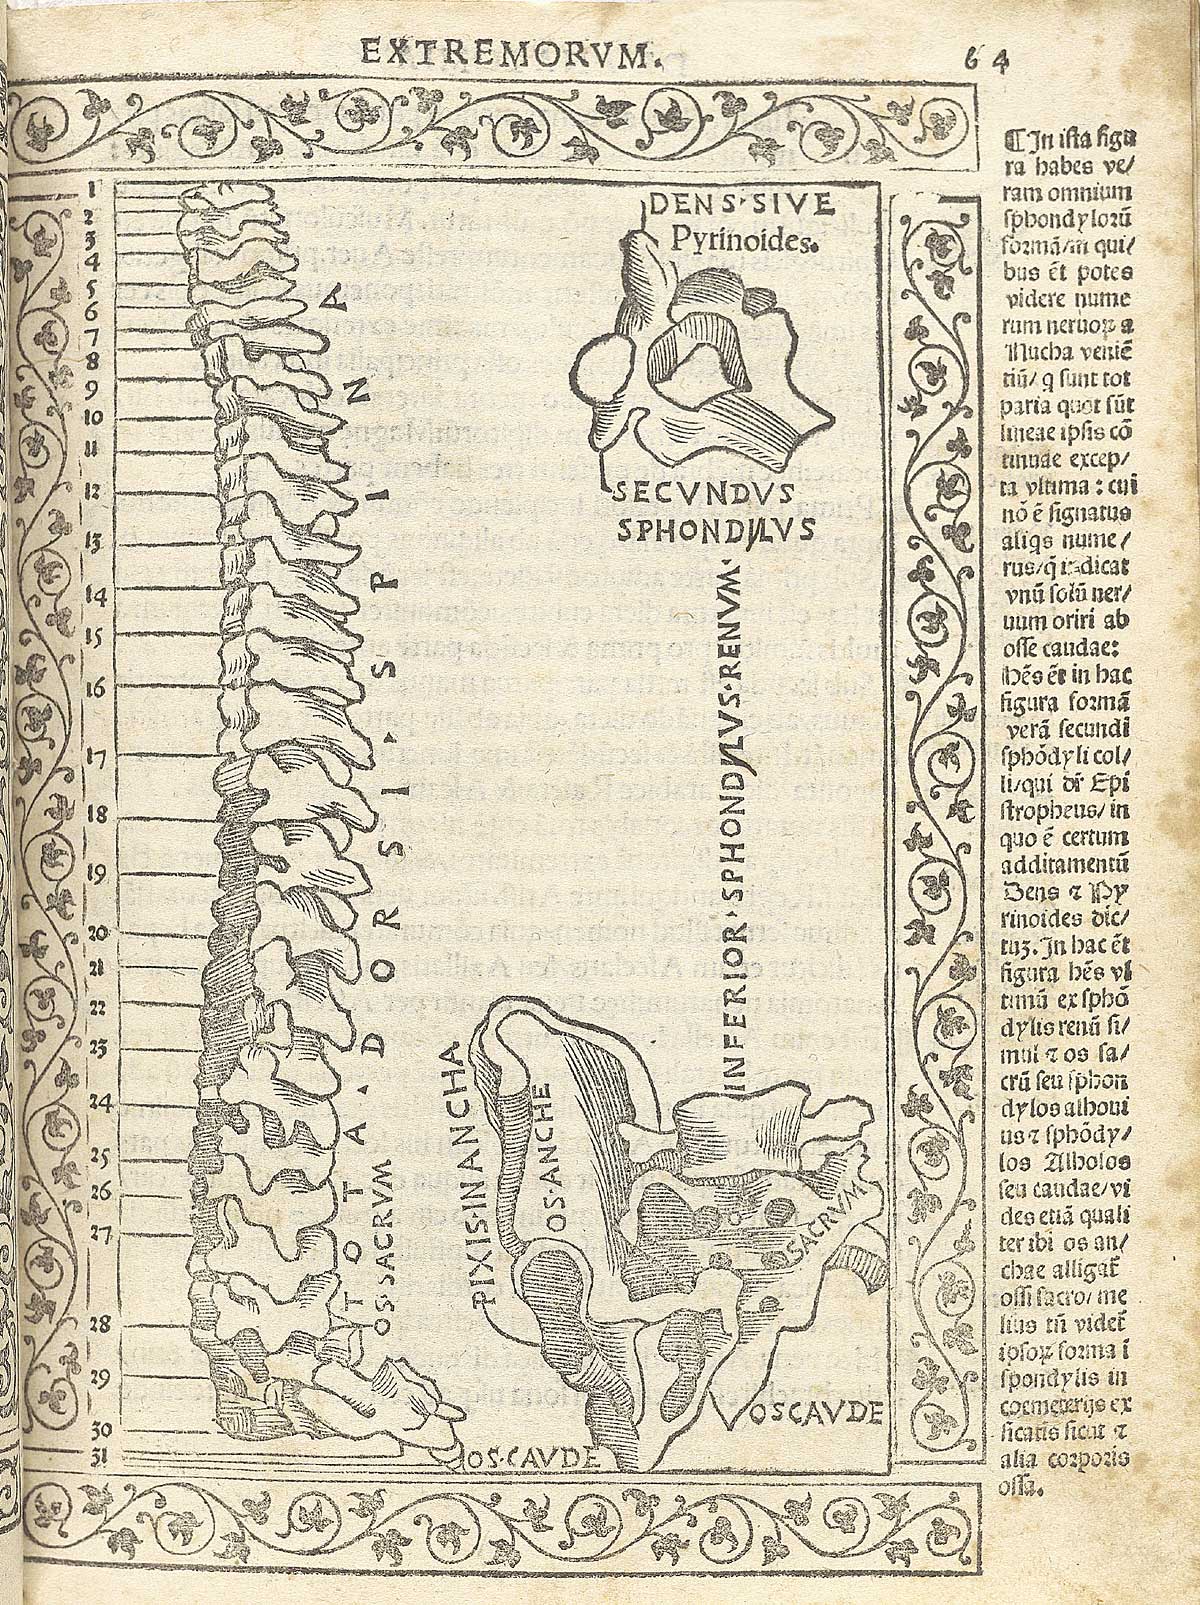 A woodcut figure of all the vertebrae of the spinal column viewed from the side, numbered, with a woodcut border and text in Latin on the right side of page, from Berengario da Carpi’s Isagogae breues, Bologna, 1523, NLM Call no. WZ 240 B488i 1523.